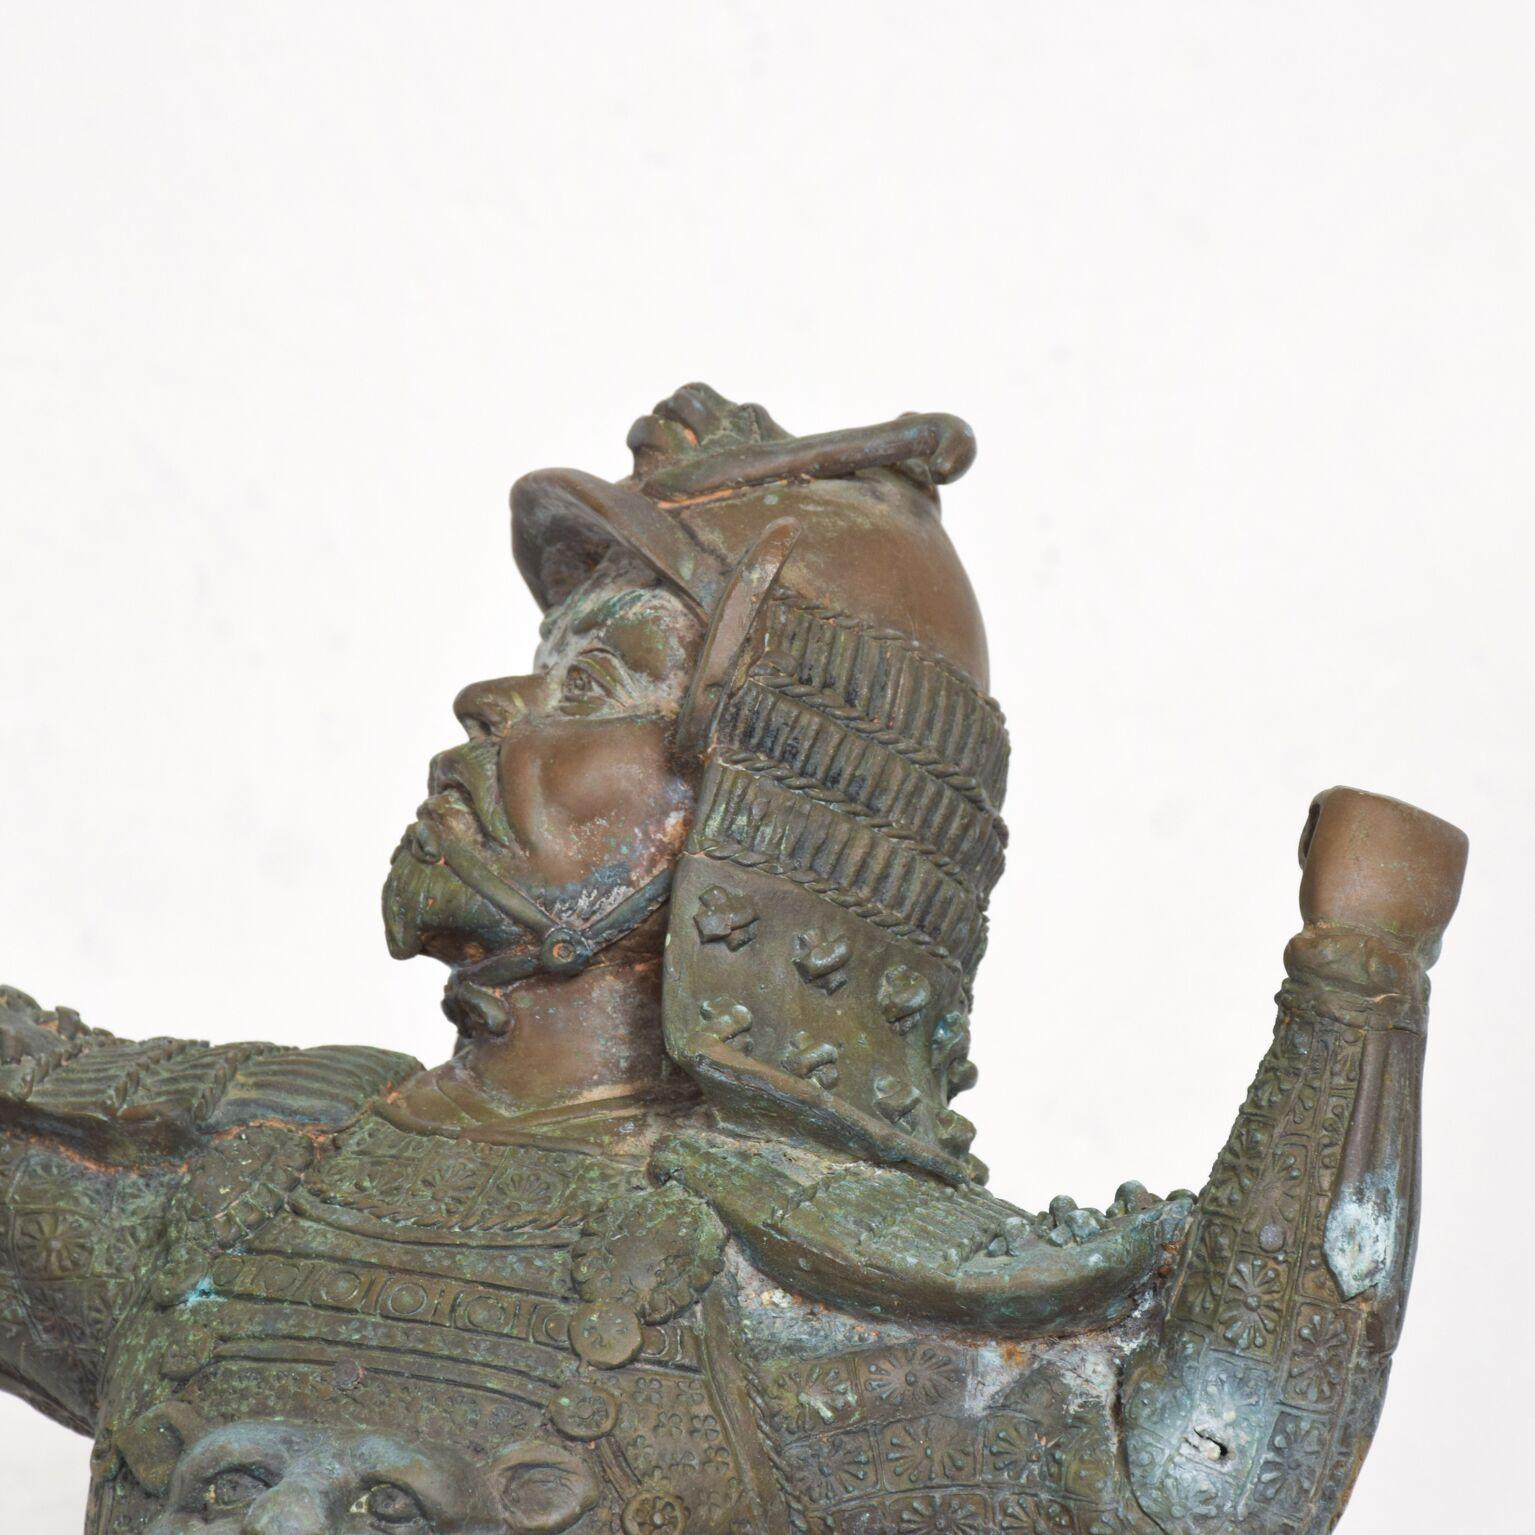 Fine Chinese Sculpture Warrior Terracotta Army Xian in Carved Bronze
18H x 10.5 W x 6 D
Original unrestored preowned vintage condition, patina and wear present. Rust visible on one leg.
See images provided.